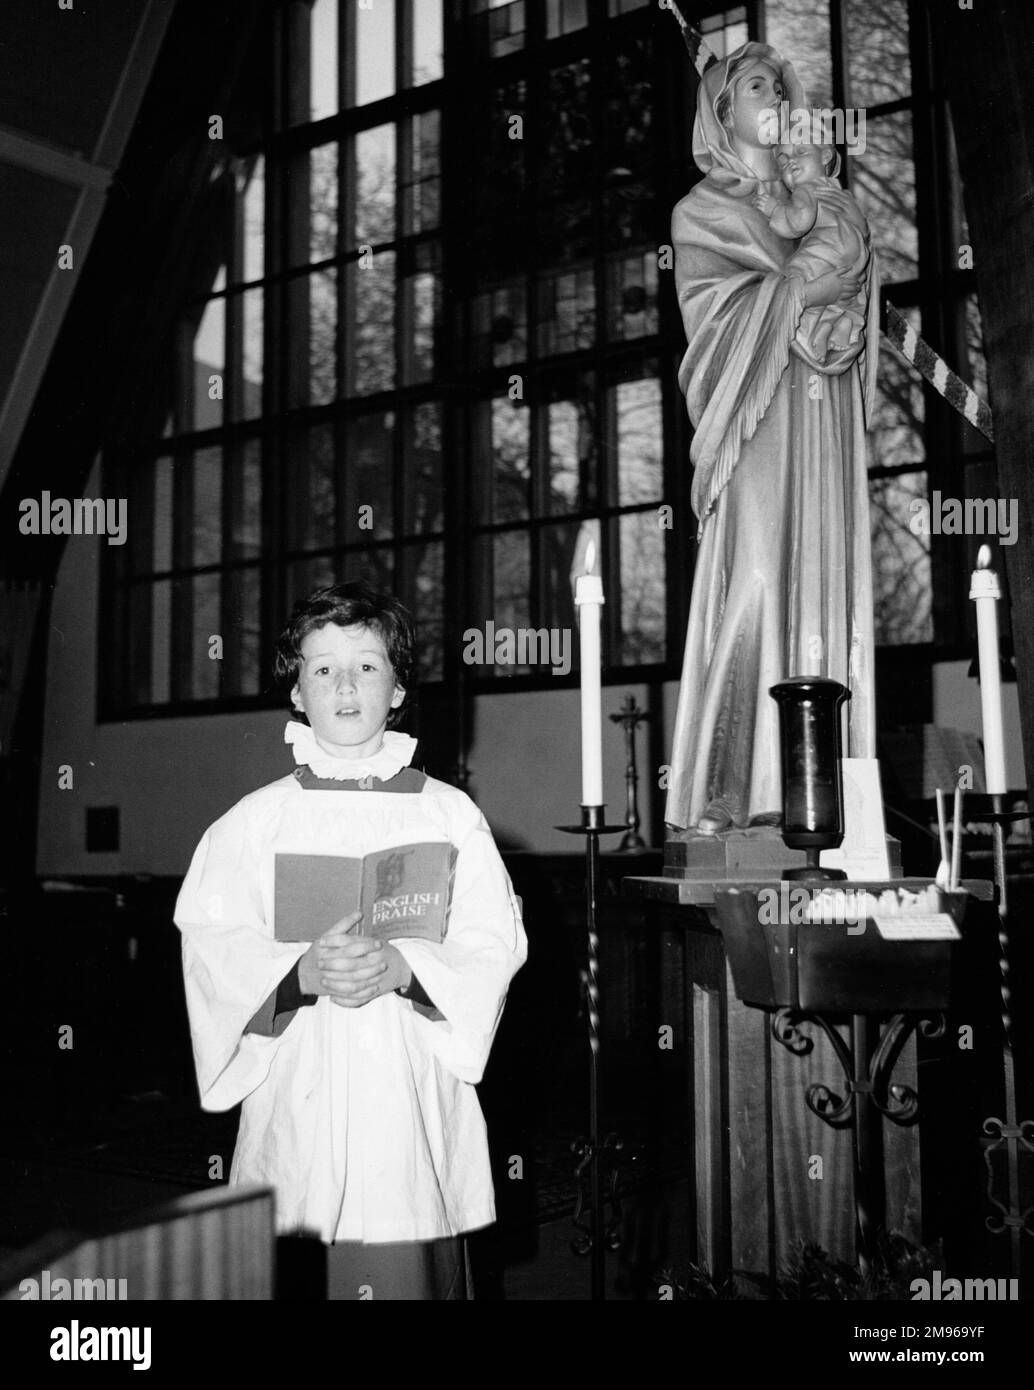 A choirboy singing solo in front of a modern stained glass window at Salfords Church, Horley, Surrey.  He is holding a book entitled 'English Praise'.  There is a statue of the Virgin Mary and Child next to him. Stock Photo